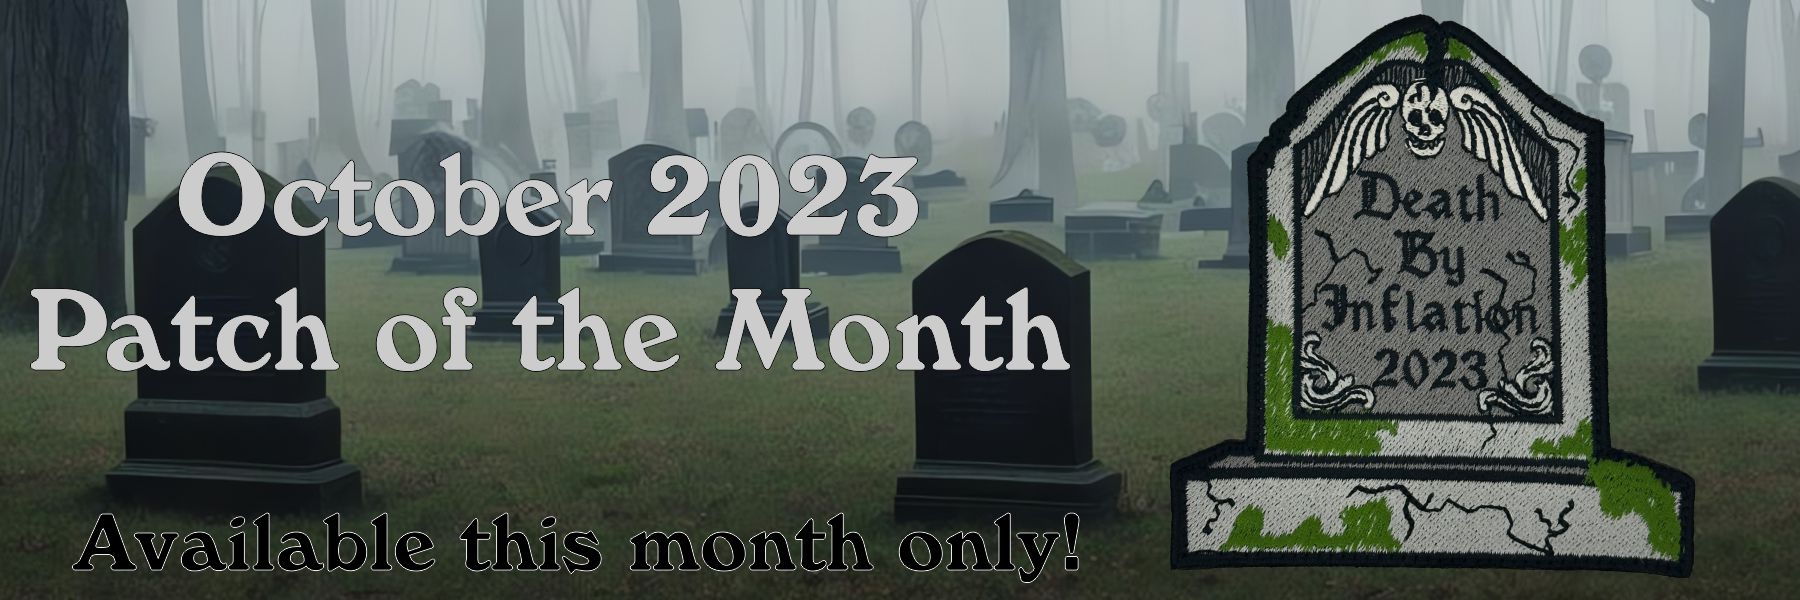 October 2023 Patch of the month